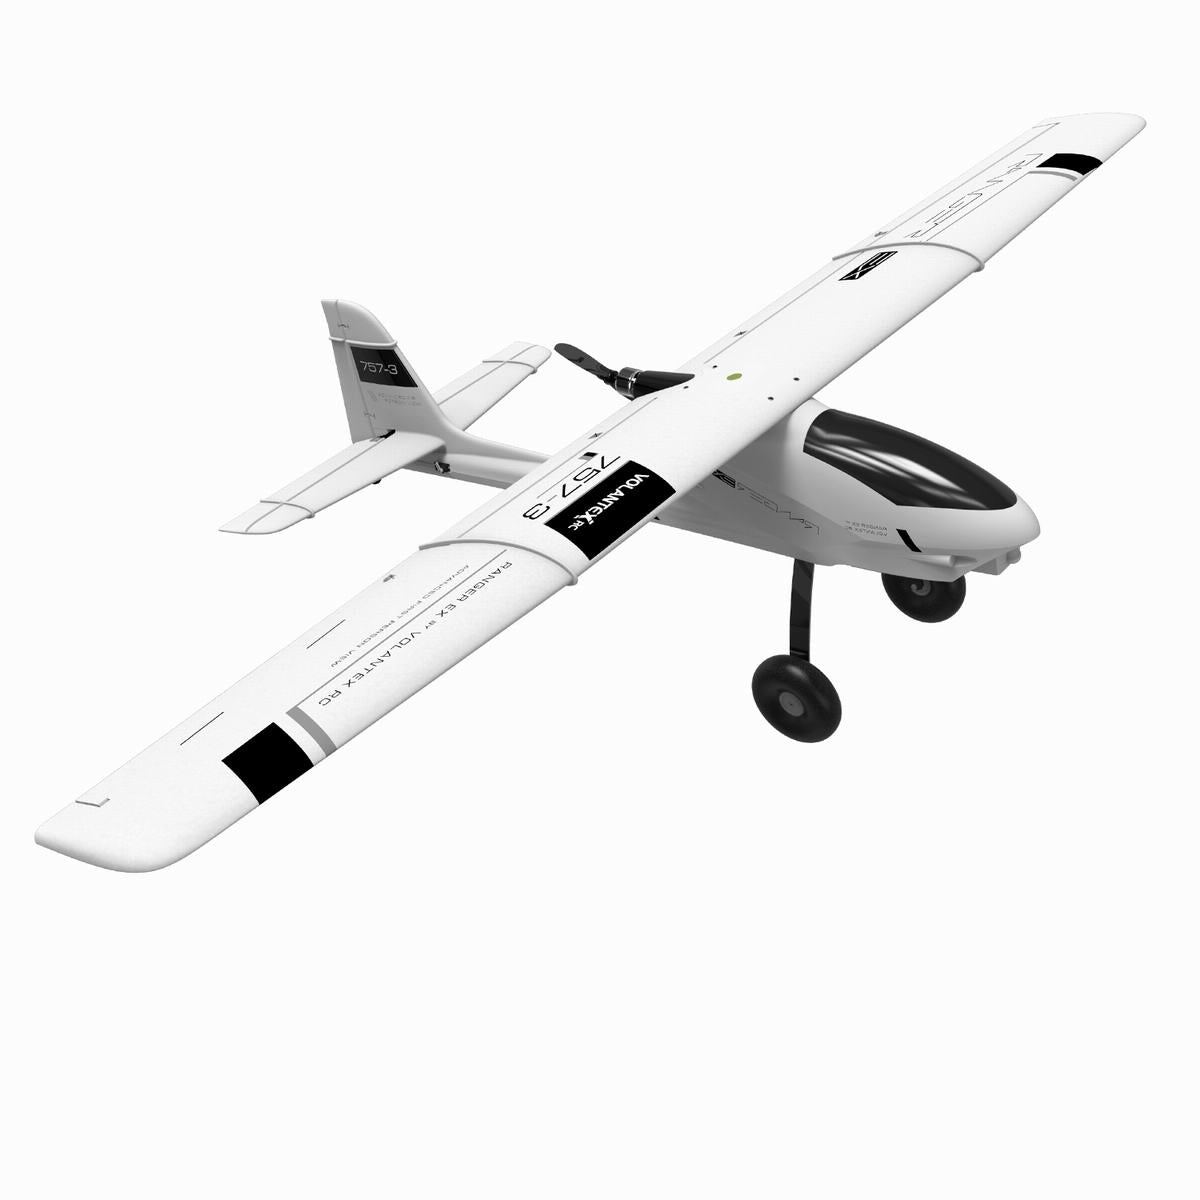 VOLANTEXRC FPV Remote Control Airplane with 2000m Winspan, Electric Radio Control Glider Aircraft FPV Ranger EX for Adults (757-3 PNP).